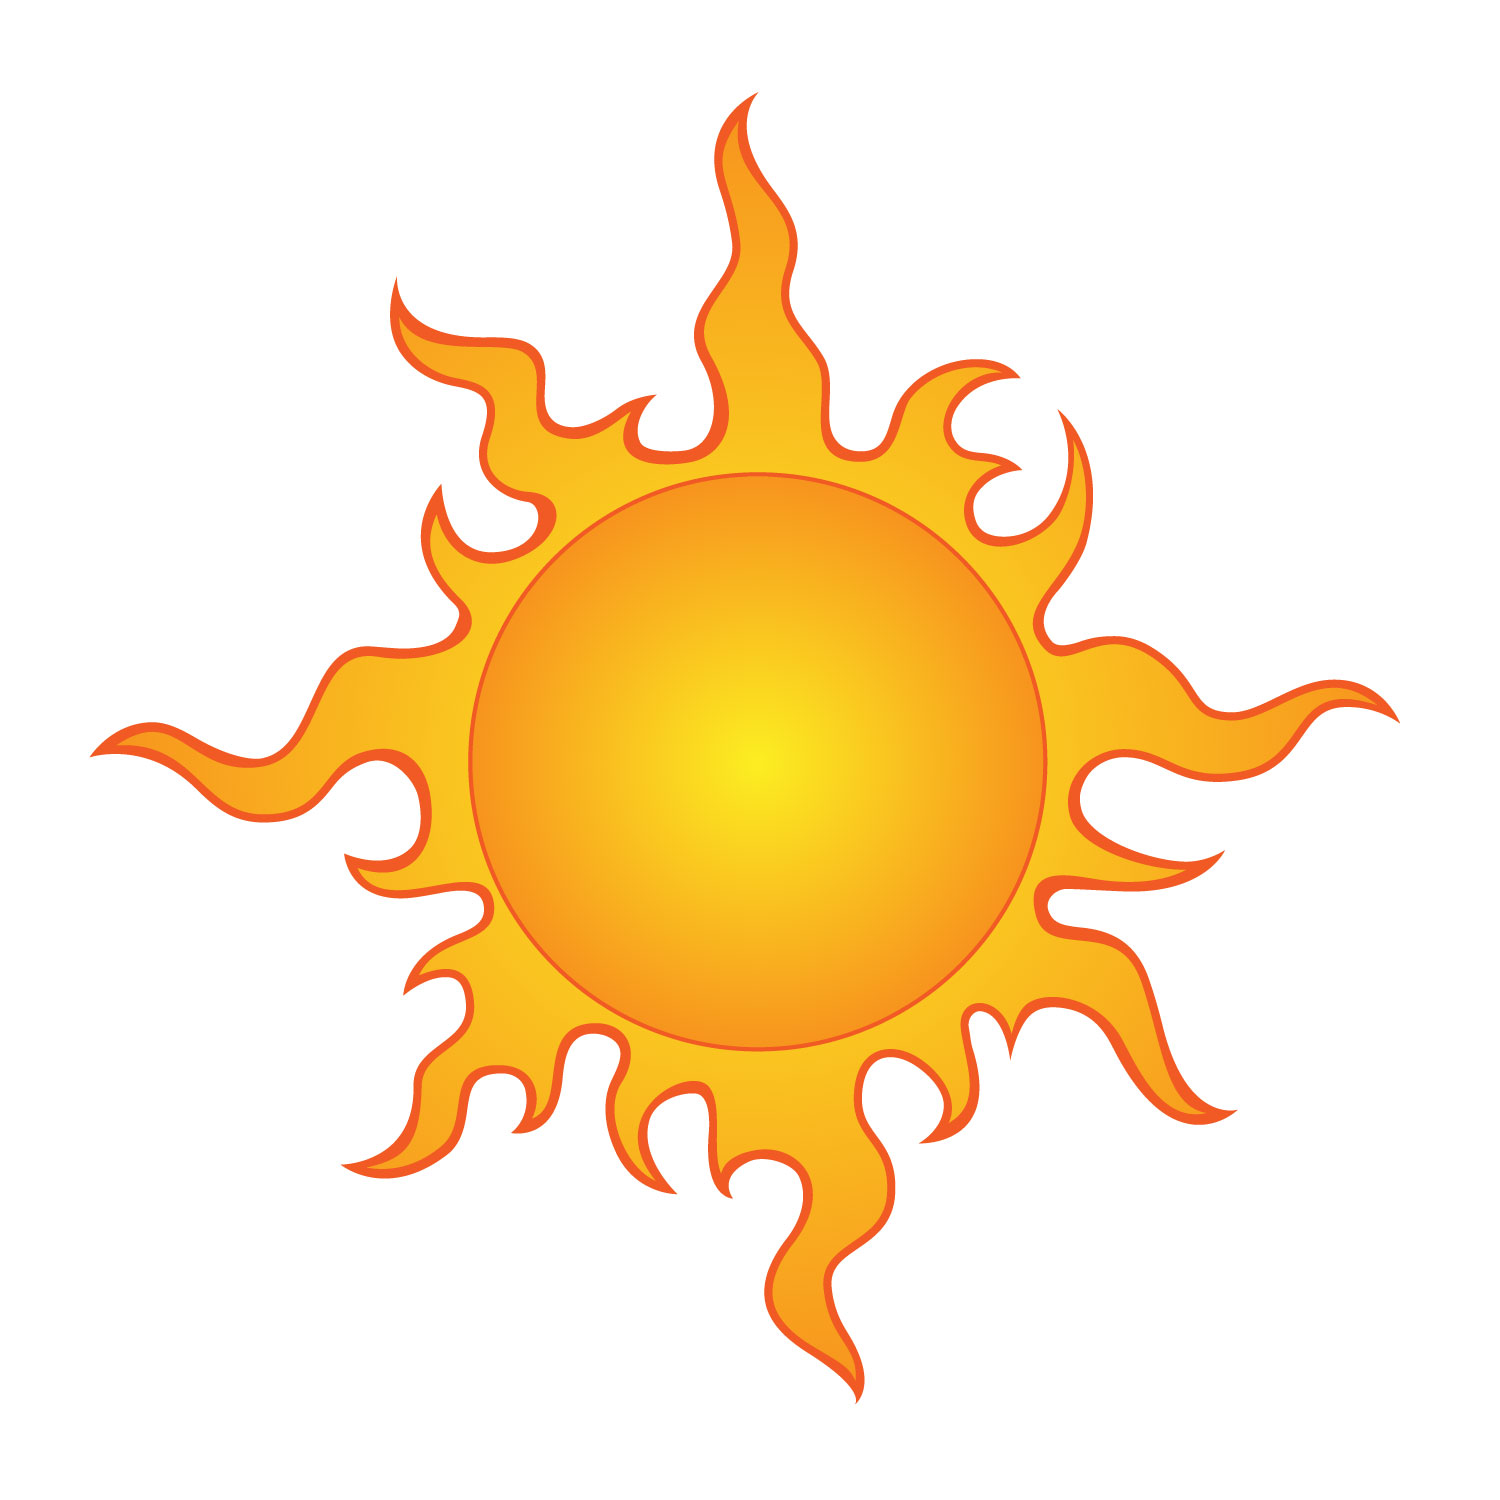 Cool Sun Drawings - Cliparts.co